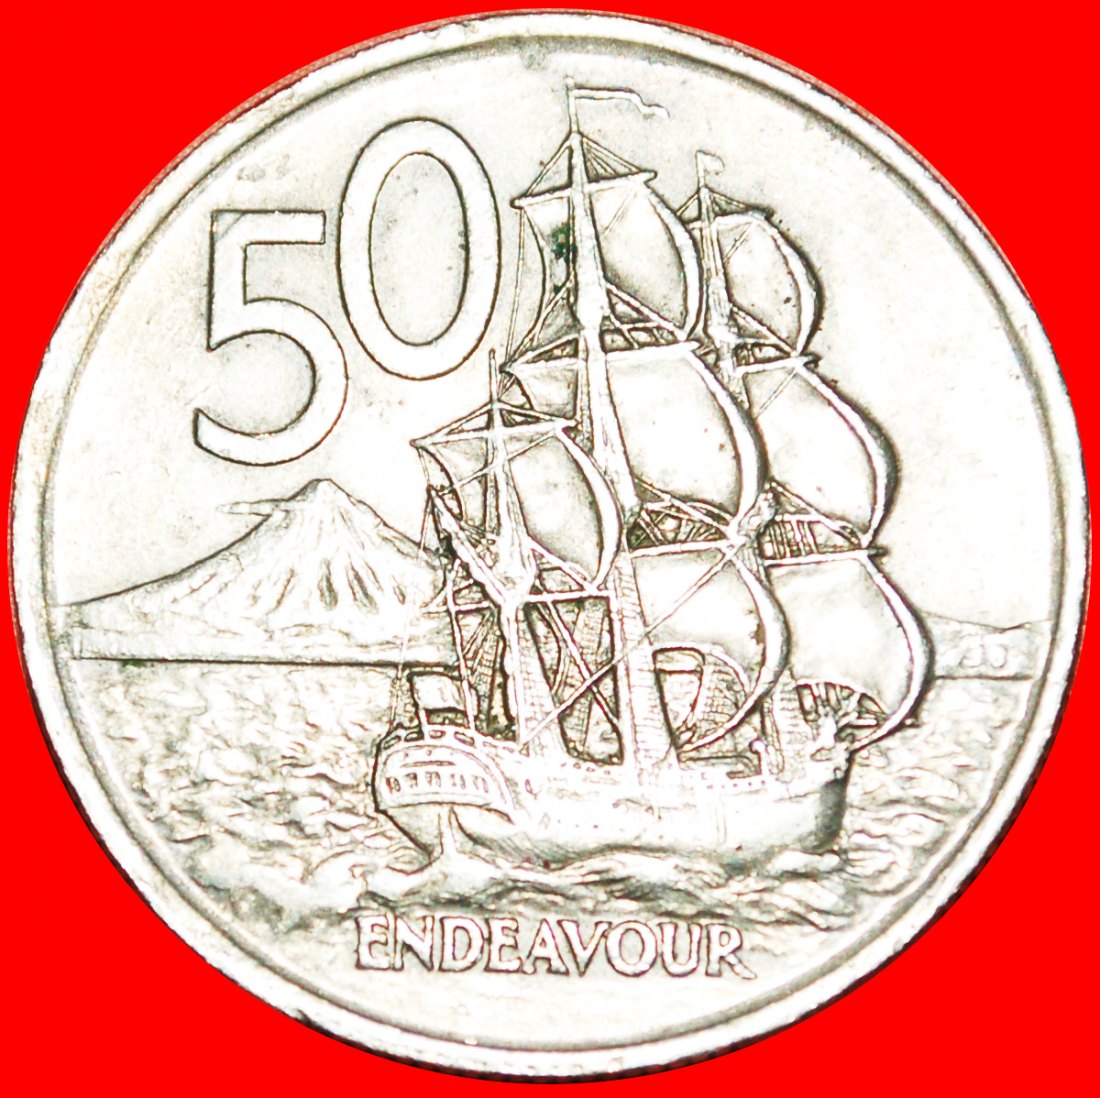  + SHIP: NEW ZEALAND ★ 50 CENTS 1975! LOW START ★ NO RESERVE!   